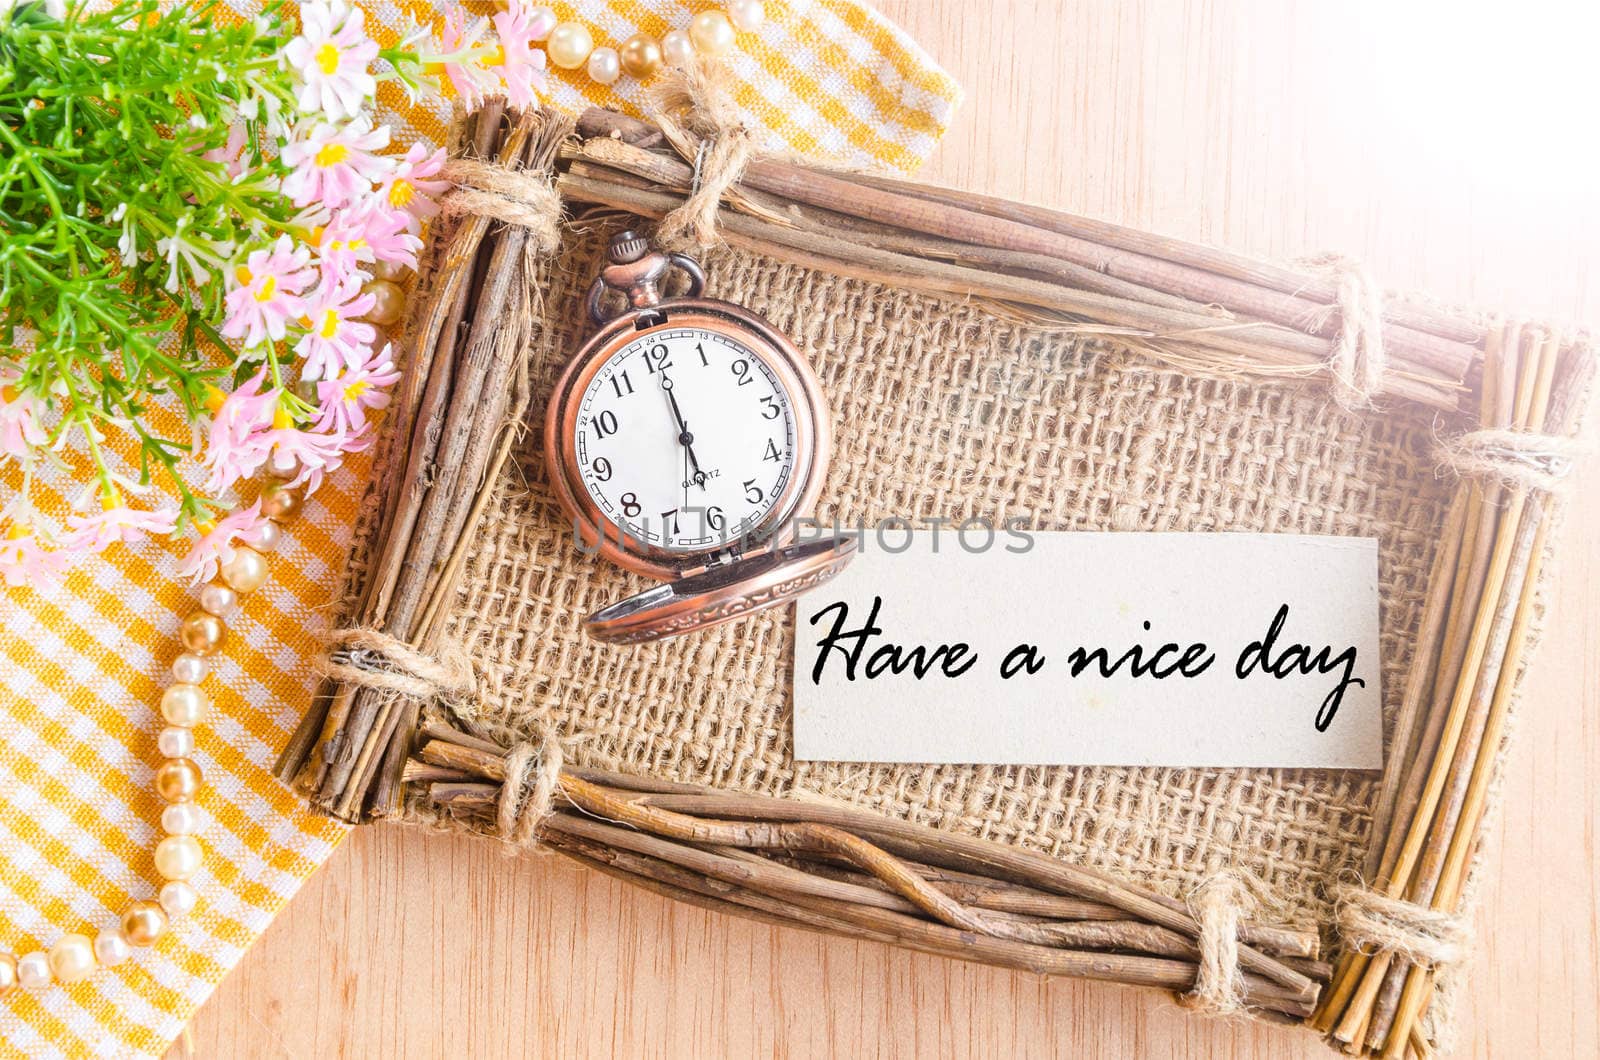 Have a nice day card and pocket watch at 6 AM. by Gamjai